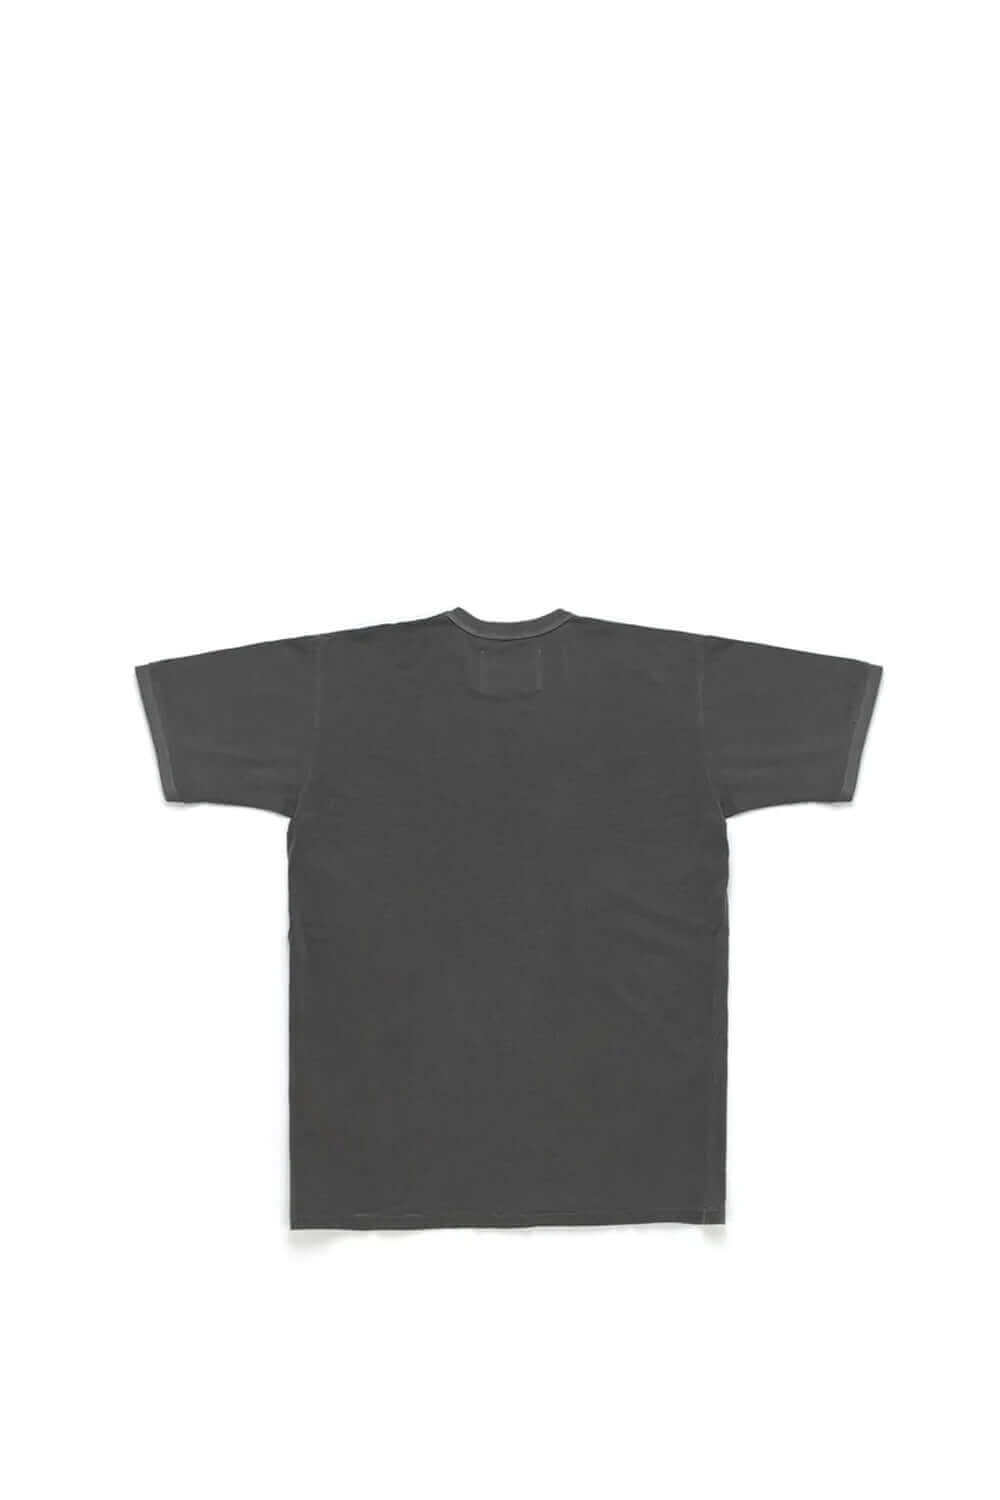 ARMLESS - HOLLYWOOD Regular fit t-shirt printed on the front. Composition: 100% Cotton HTC LOS ANGELES